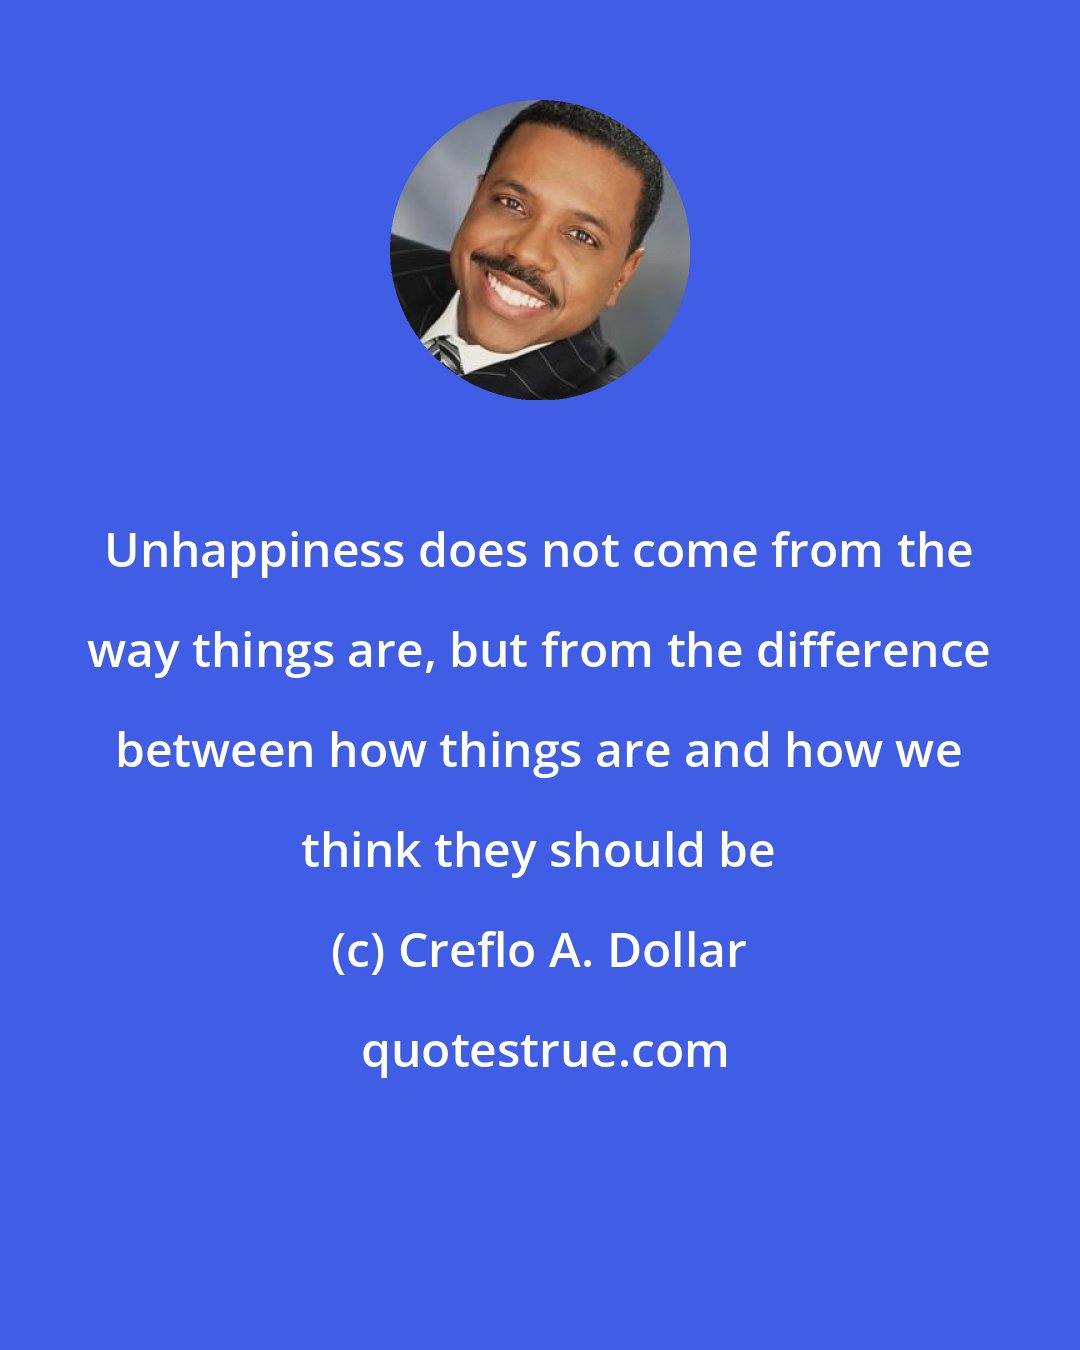 Creflo A. Dollar: Unhappiness does not come from the way things are, but from the difference between how things are and how we think they should be